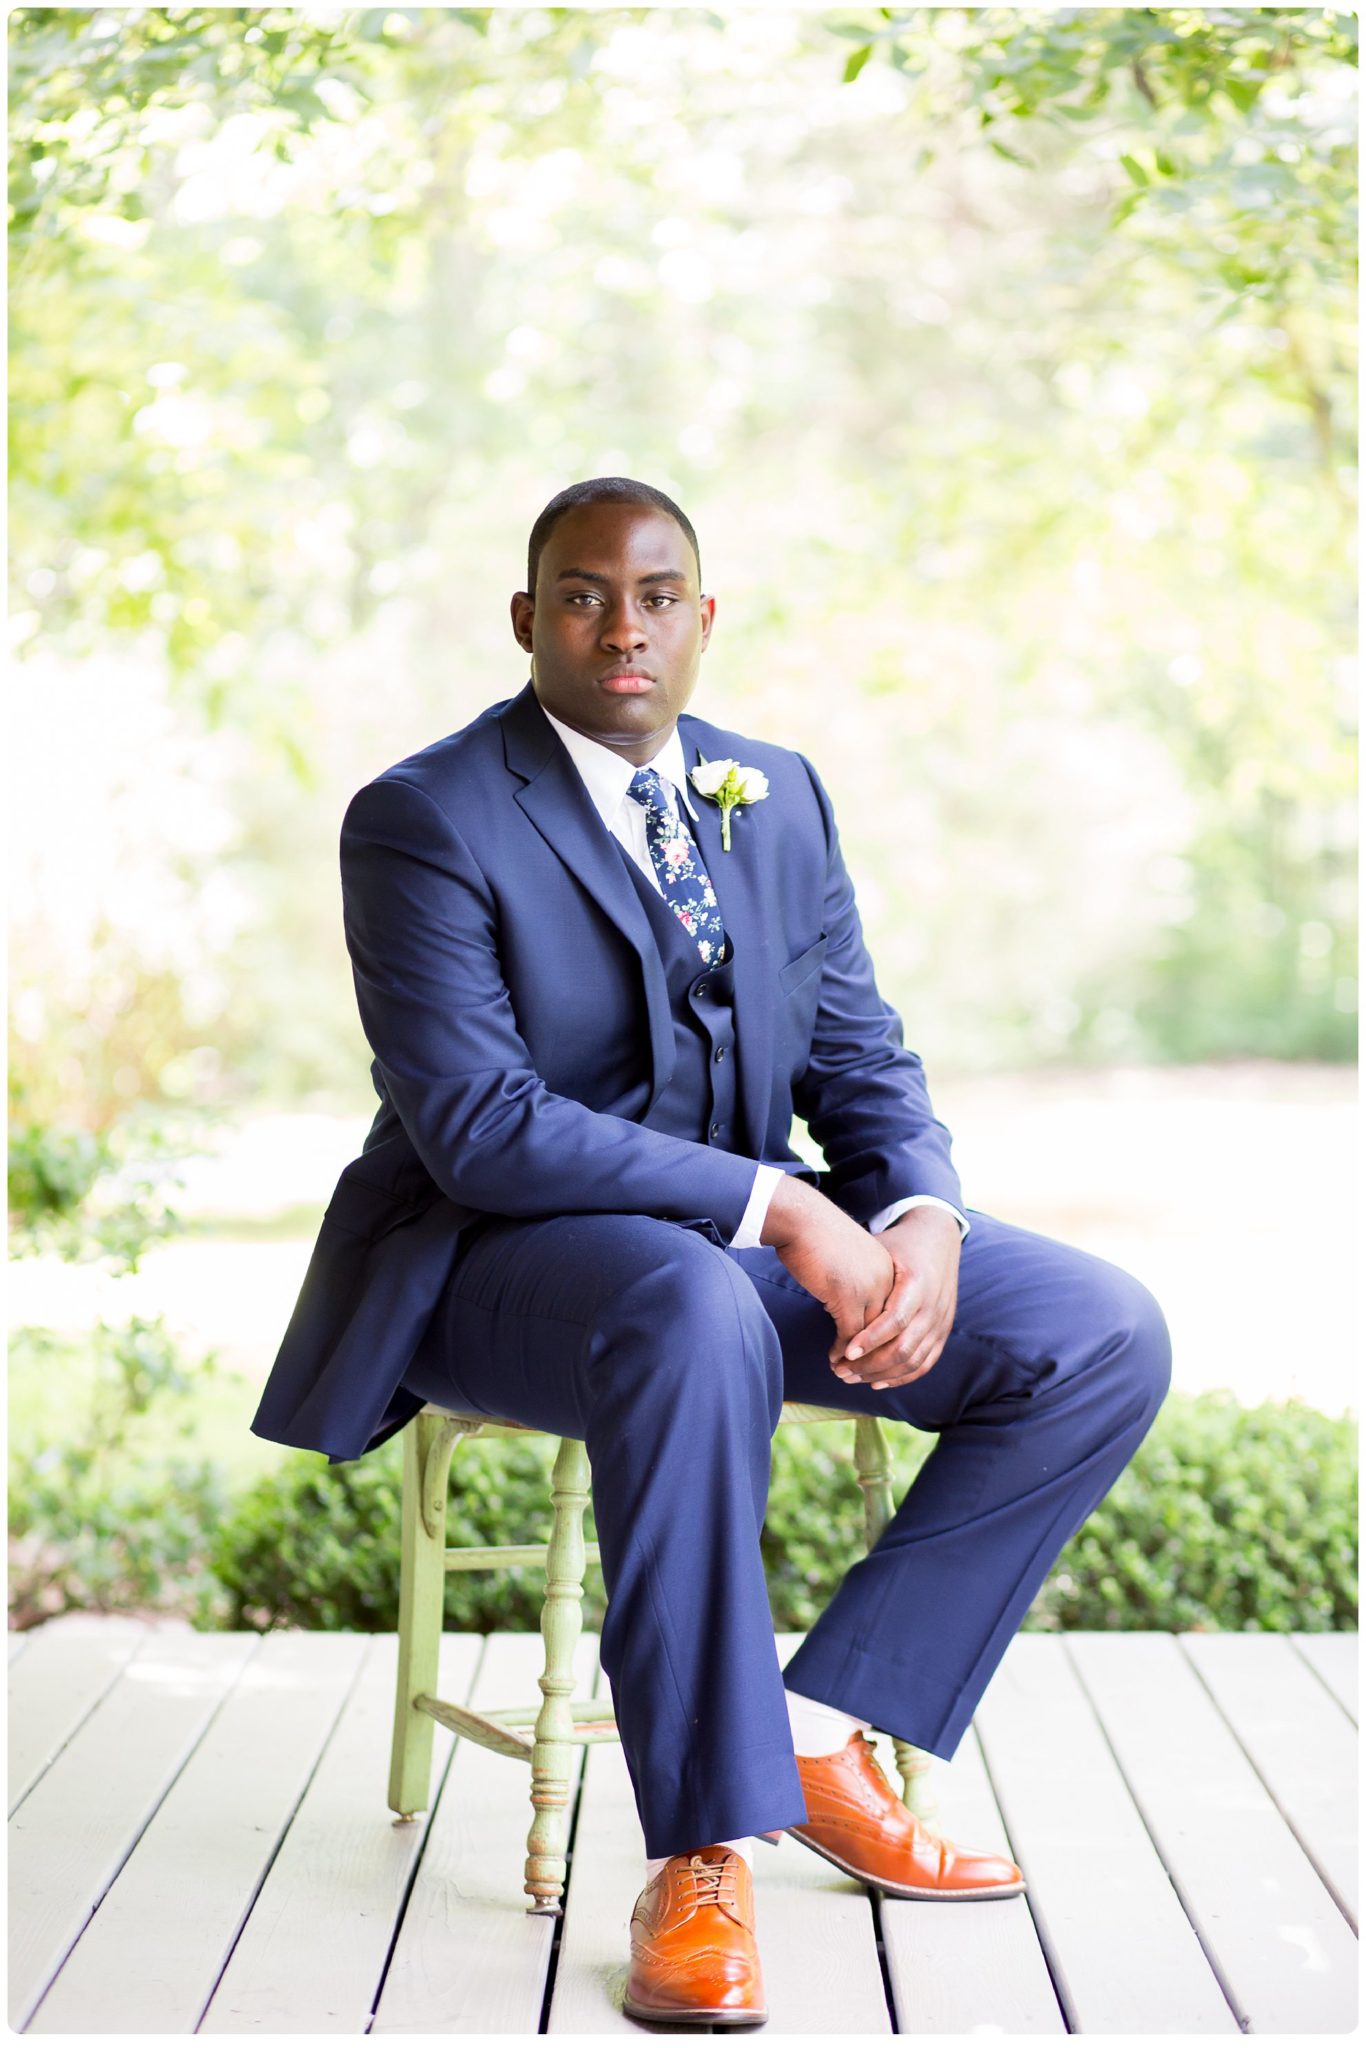 Nashville wedding at Iriswoods, Southern Belles and Blooms, navy tuxedo, whimsical garden wedding, southern wedding, southern bride, nashville bride, melanie grady photography, the best nashville wedding photographer, interracial couple wedding, mt juliet, southern groom